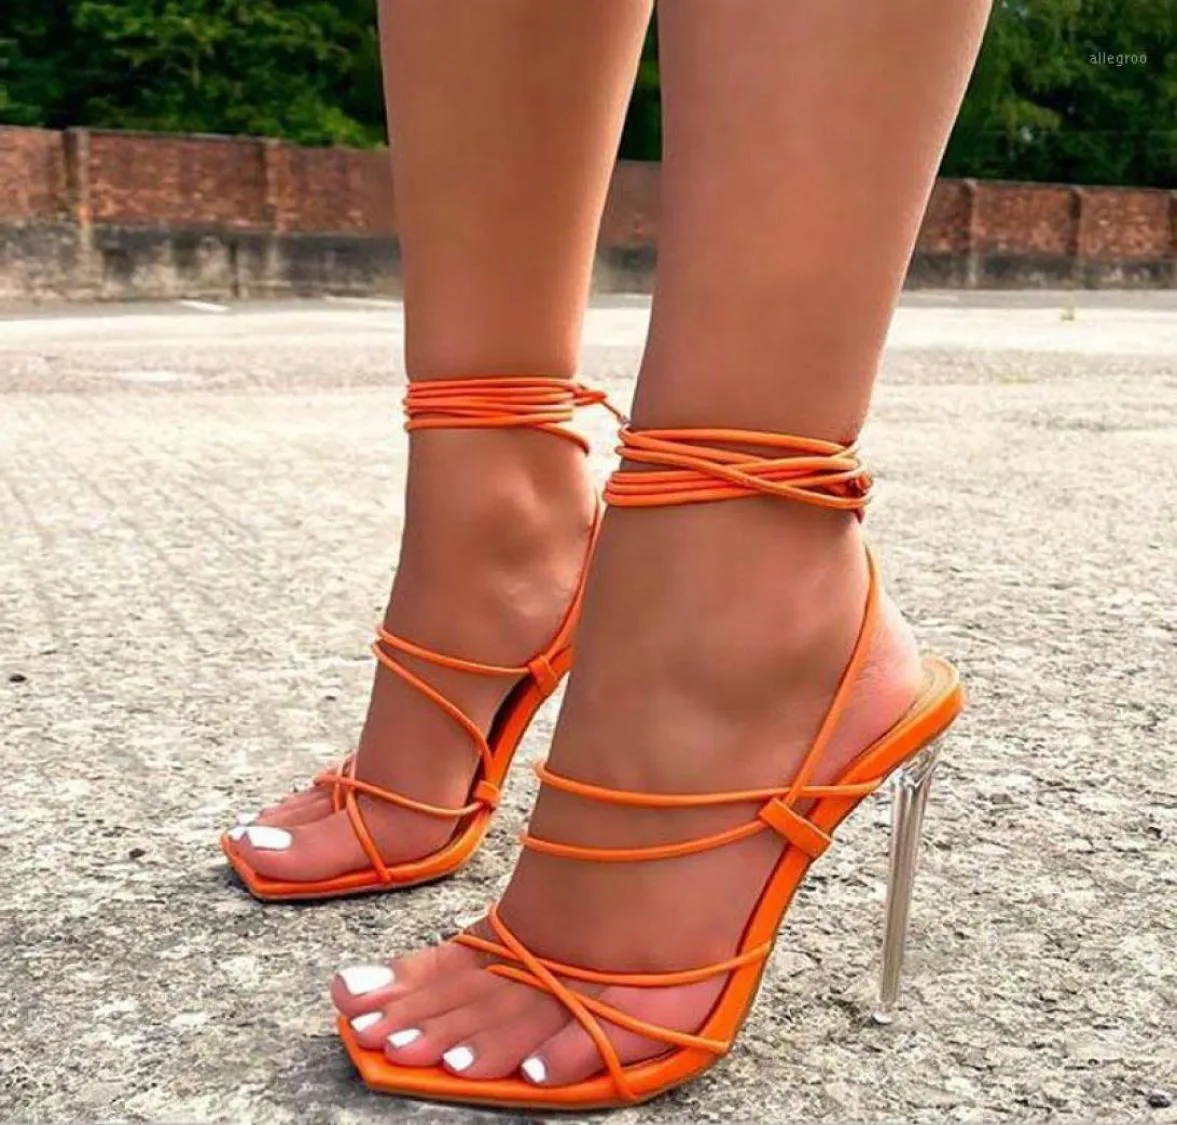 Summer Women Sandals Orange Narrow Band Square Toe Clear Thin High Heels Ankle Cross-strap Sandals Women Party Shoes19826514